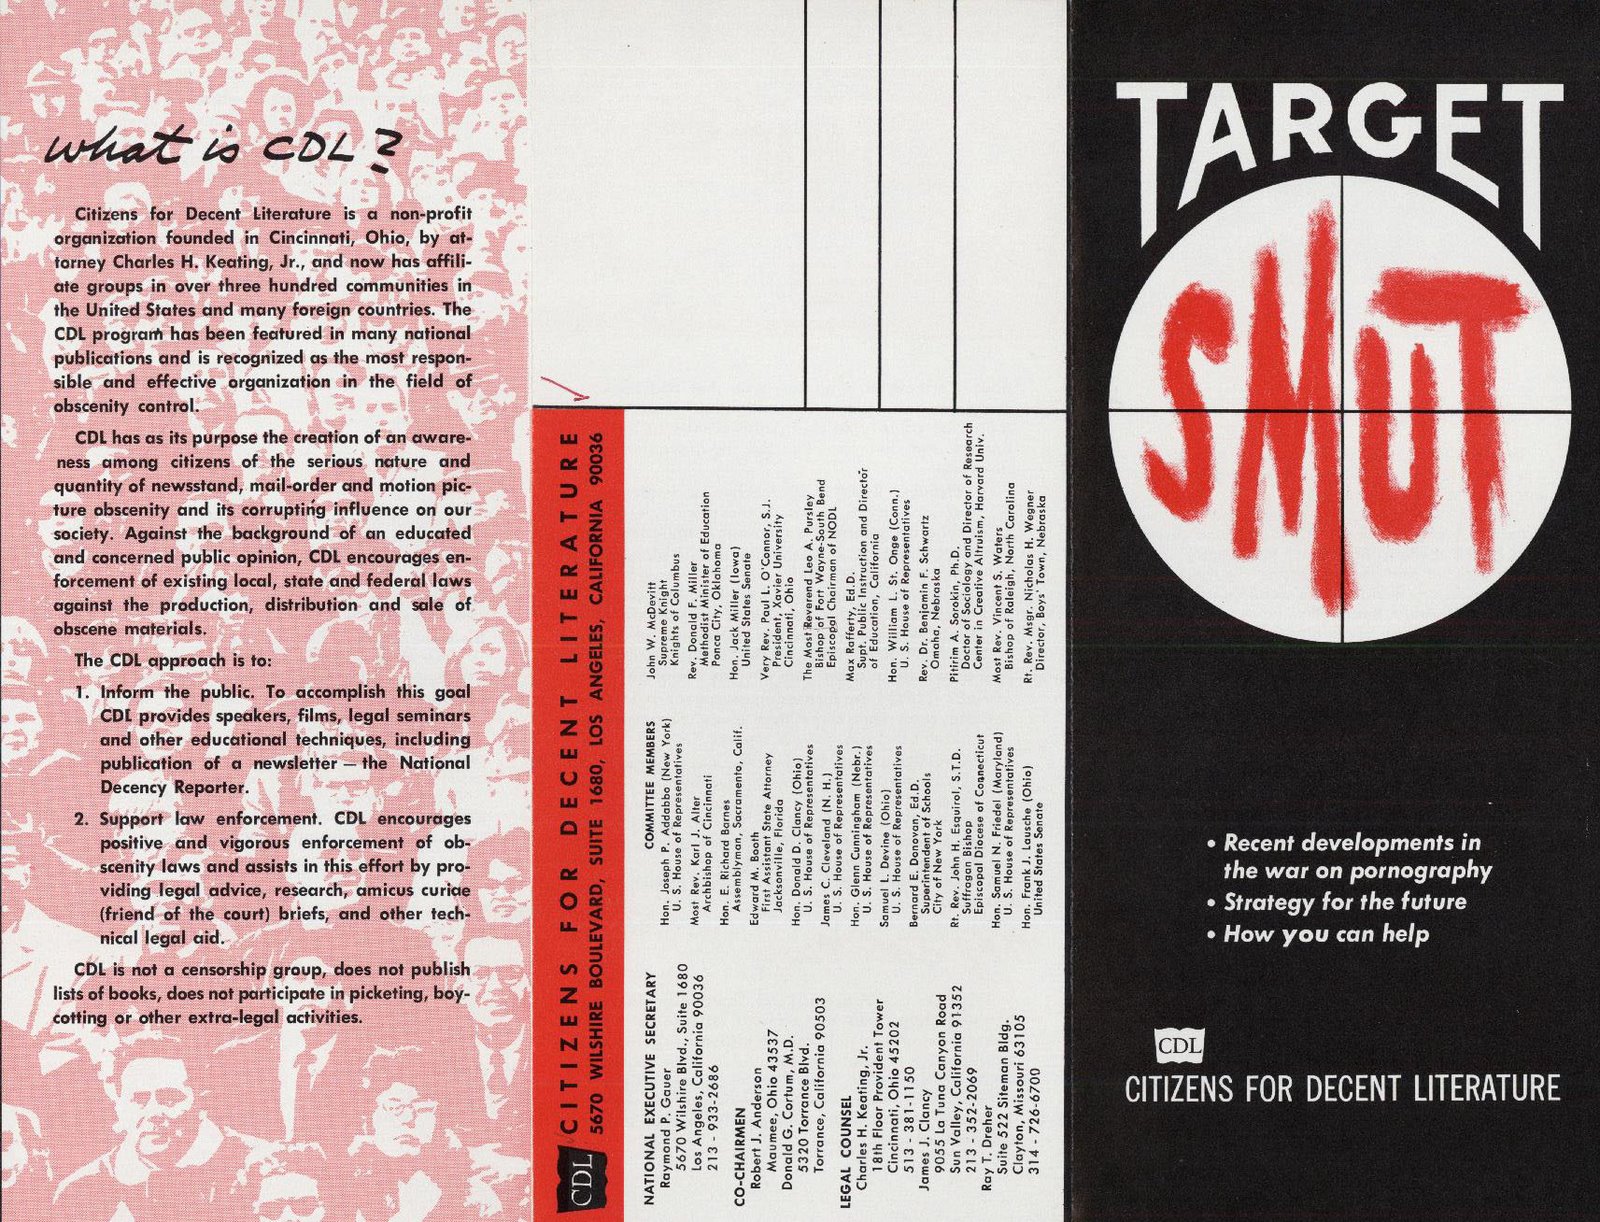 Pamphlet "Target Smut" issued by Citizens for Decent Literature, which fought back against obscenity in media